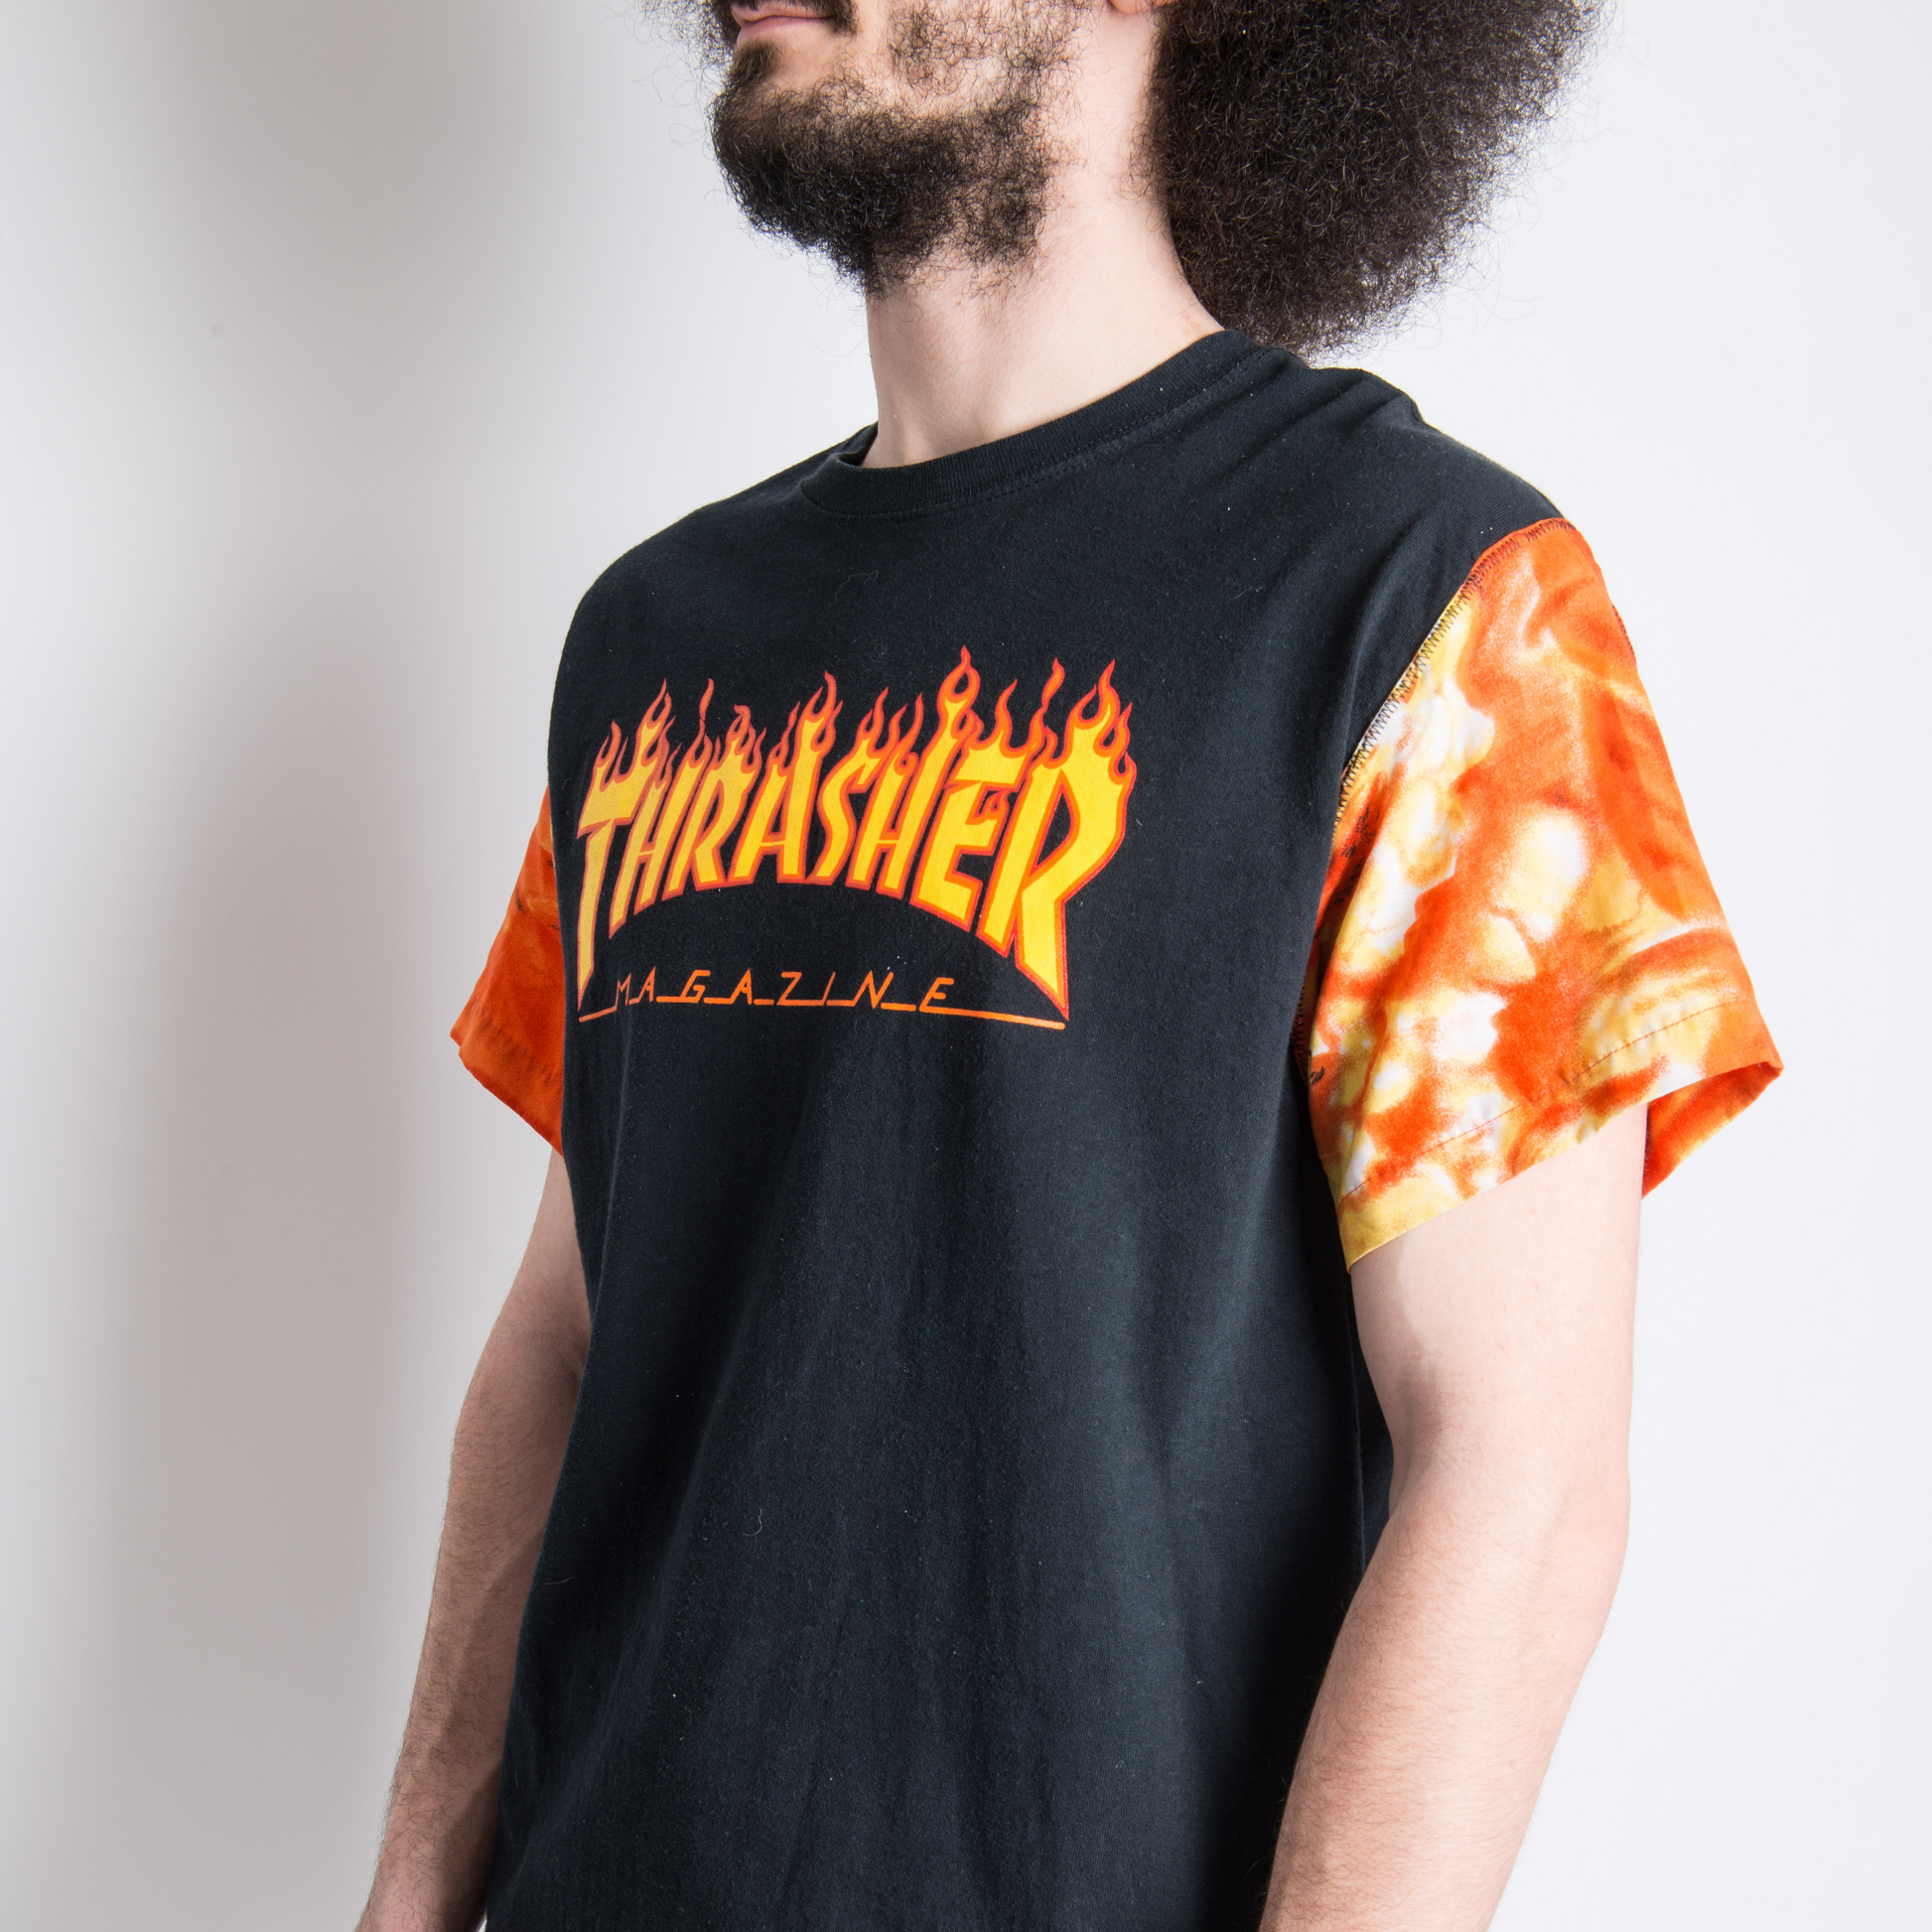 Black "THRASHER" T-SHIRT REVAMPED WITH VINTAGE SLEEVES. Alterations available.